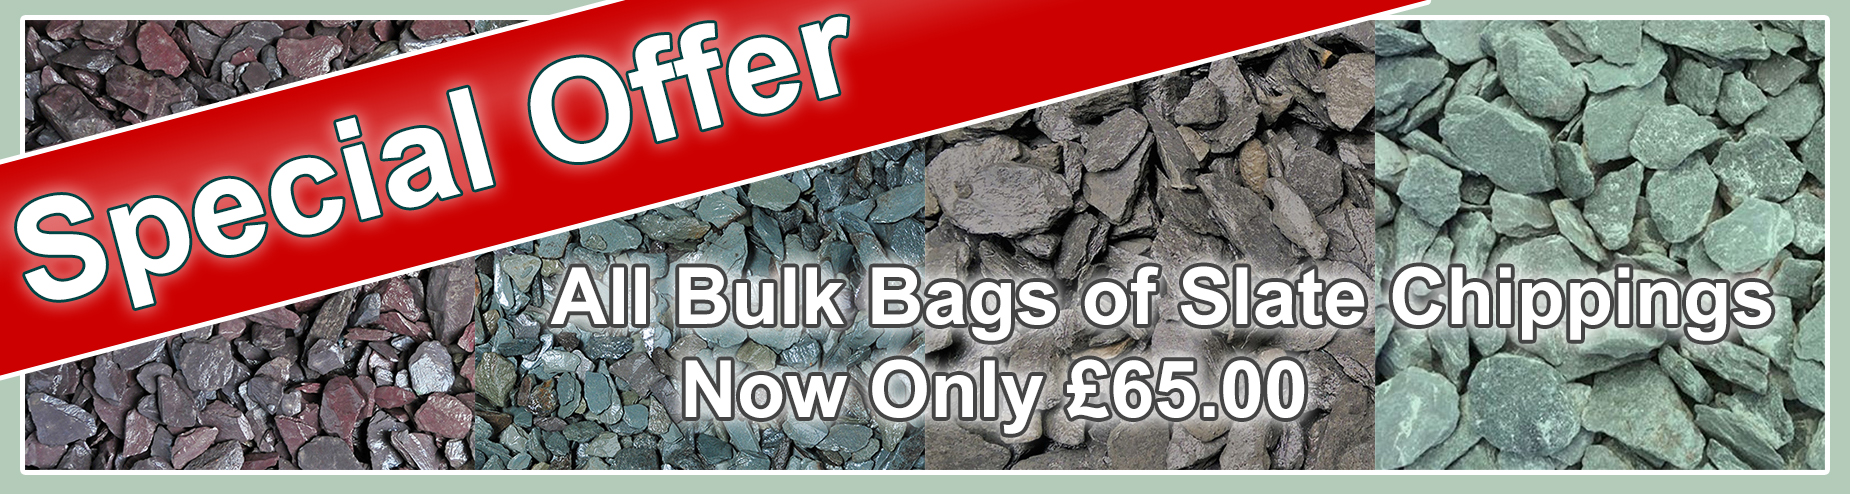 Special Offer on bulk bags of slate chippings